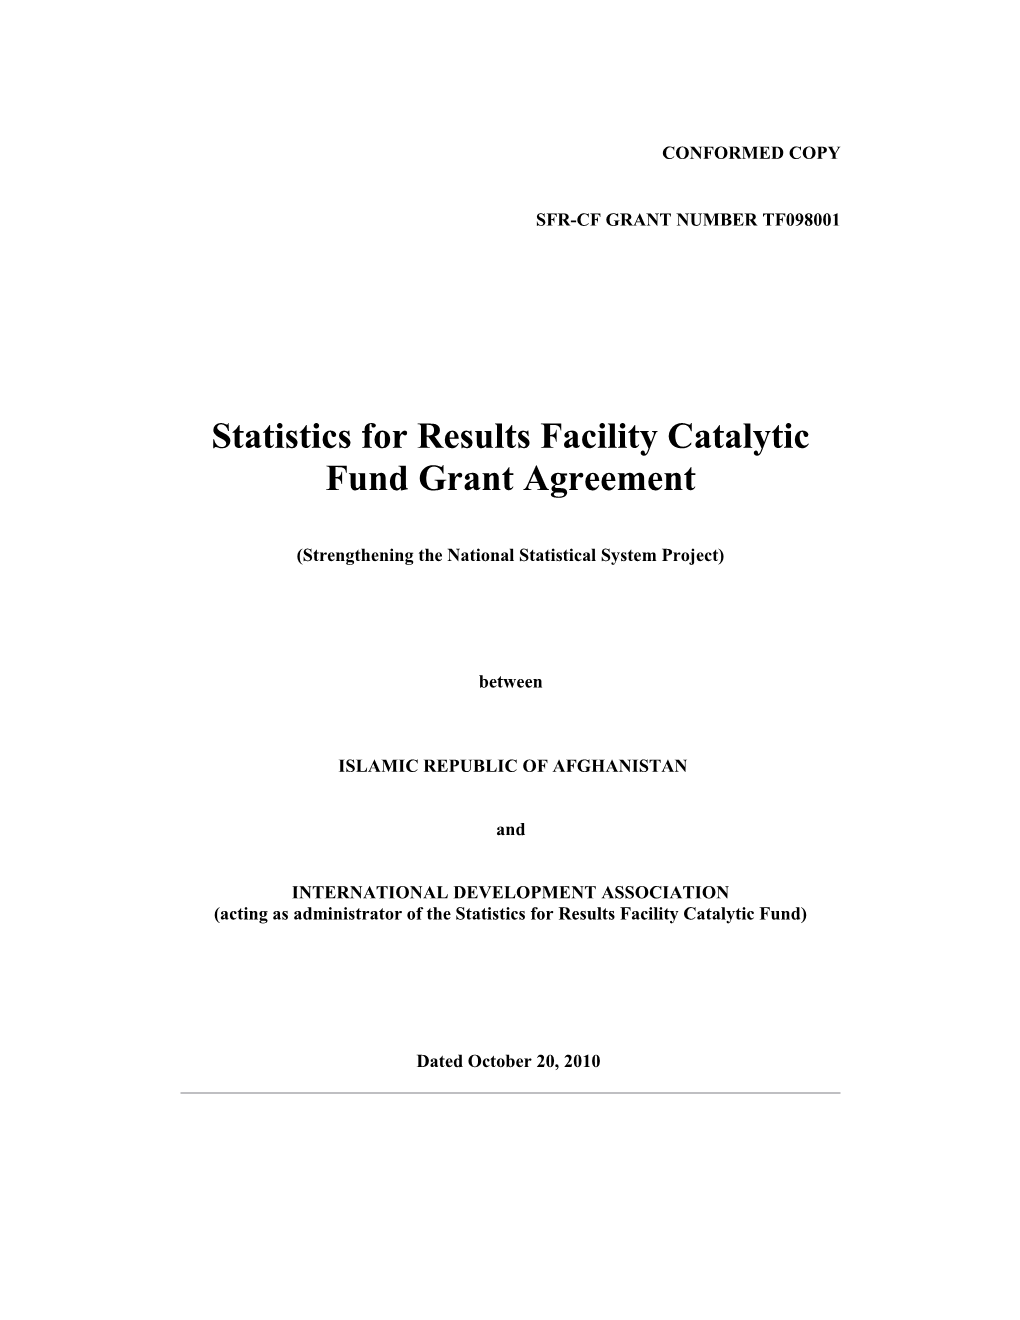 Statistics for Results Facility Catalytic Fund Grant Agreement